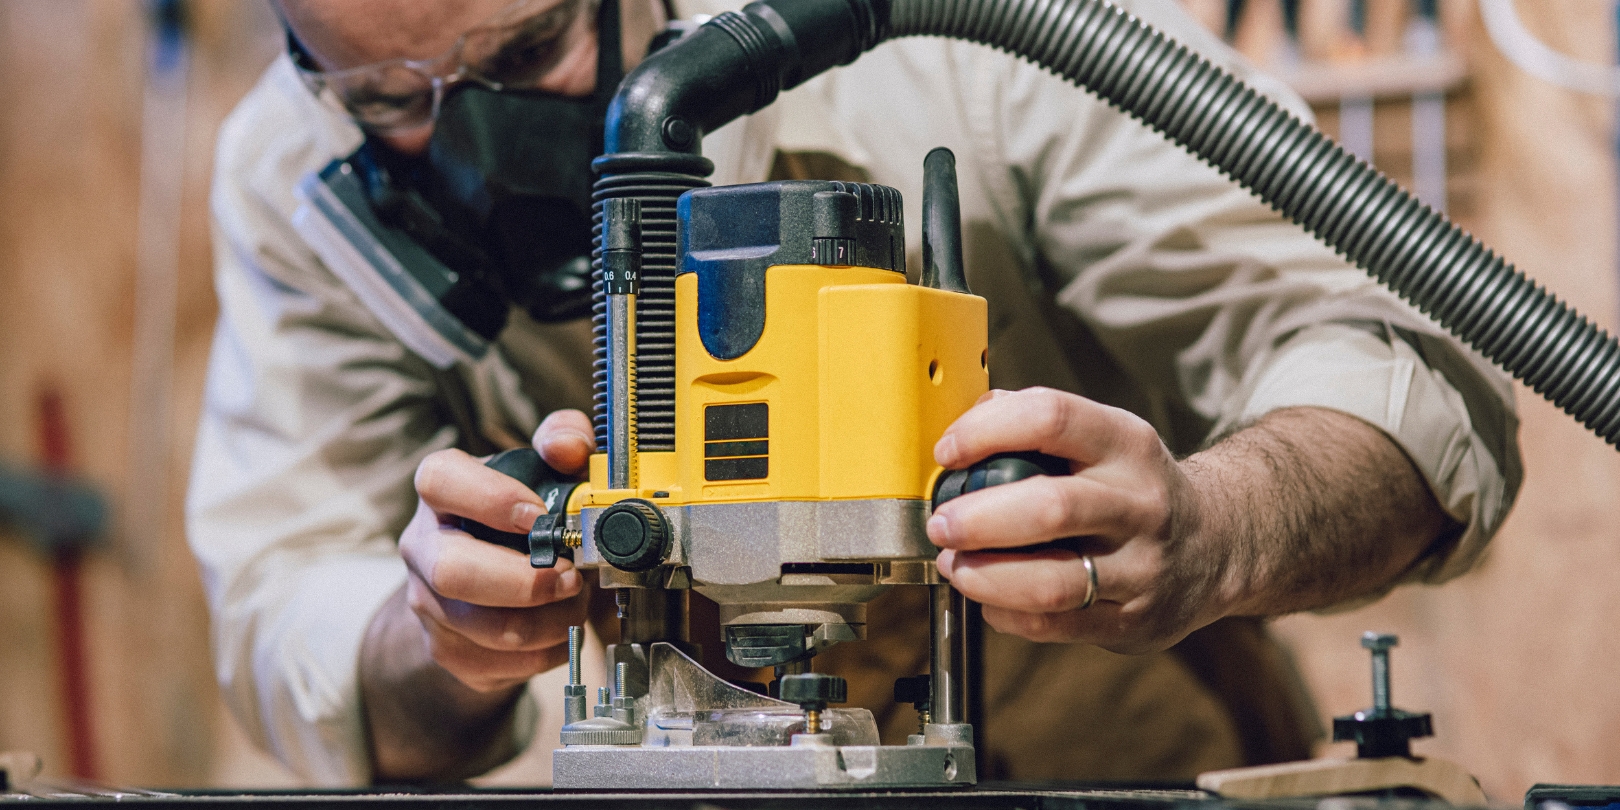 Carpenter Using a Router in a Workshop